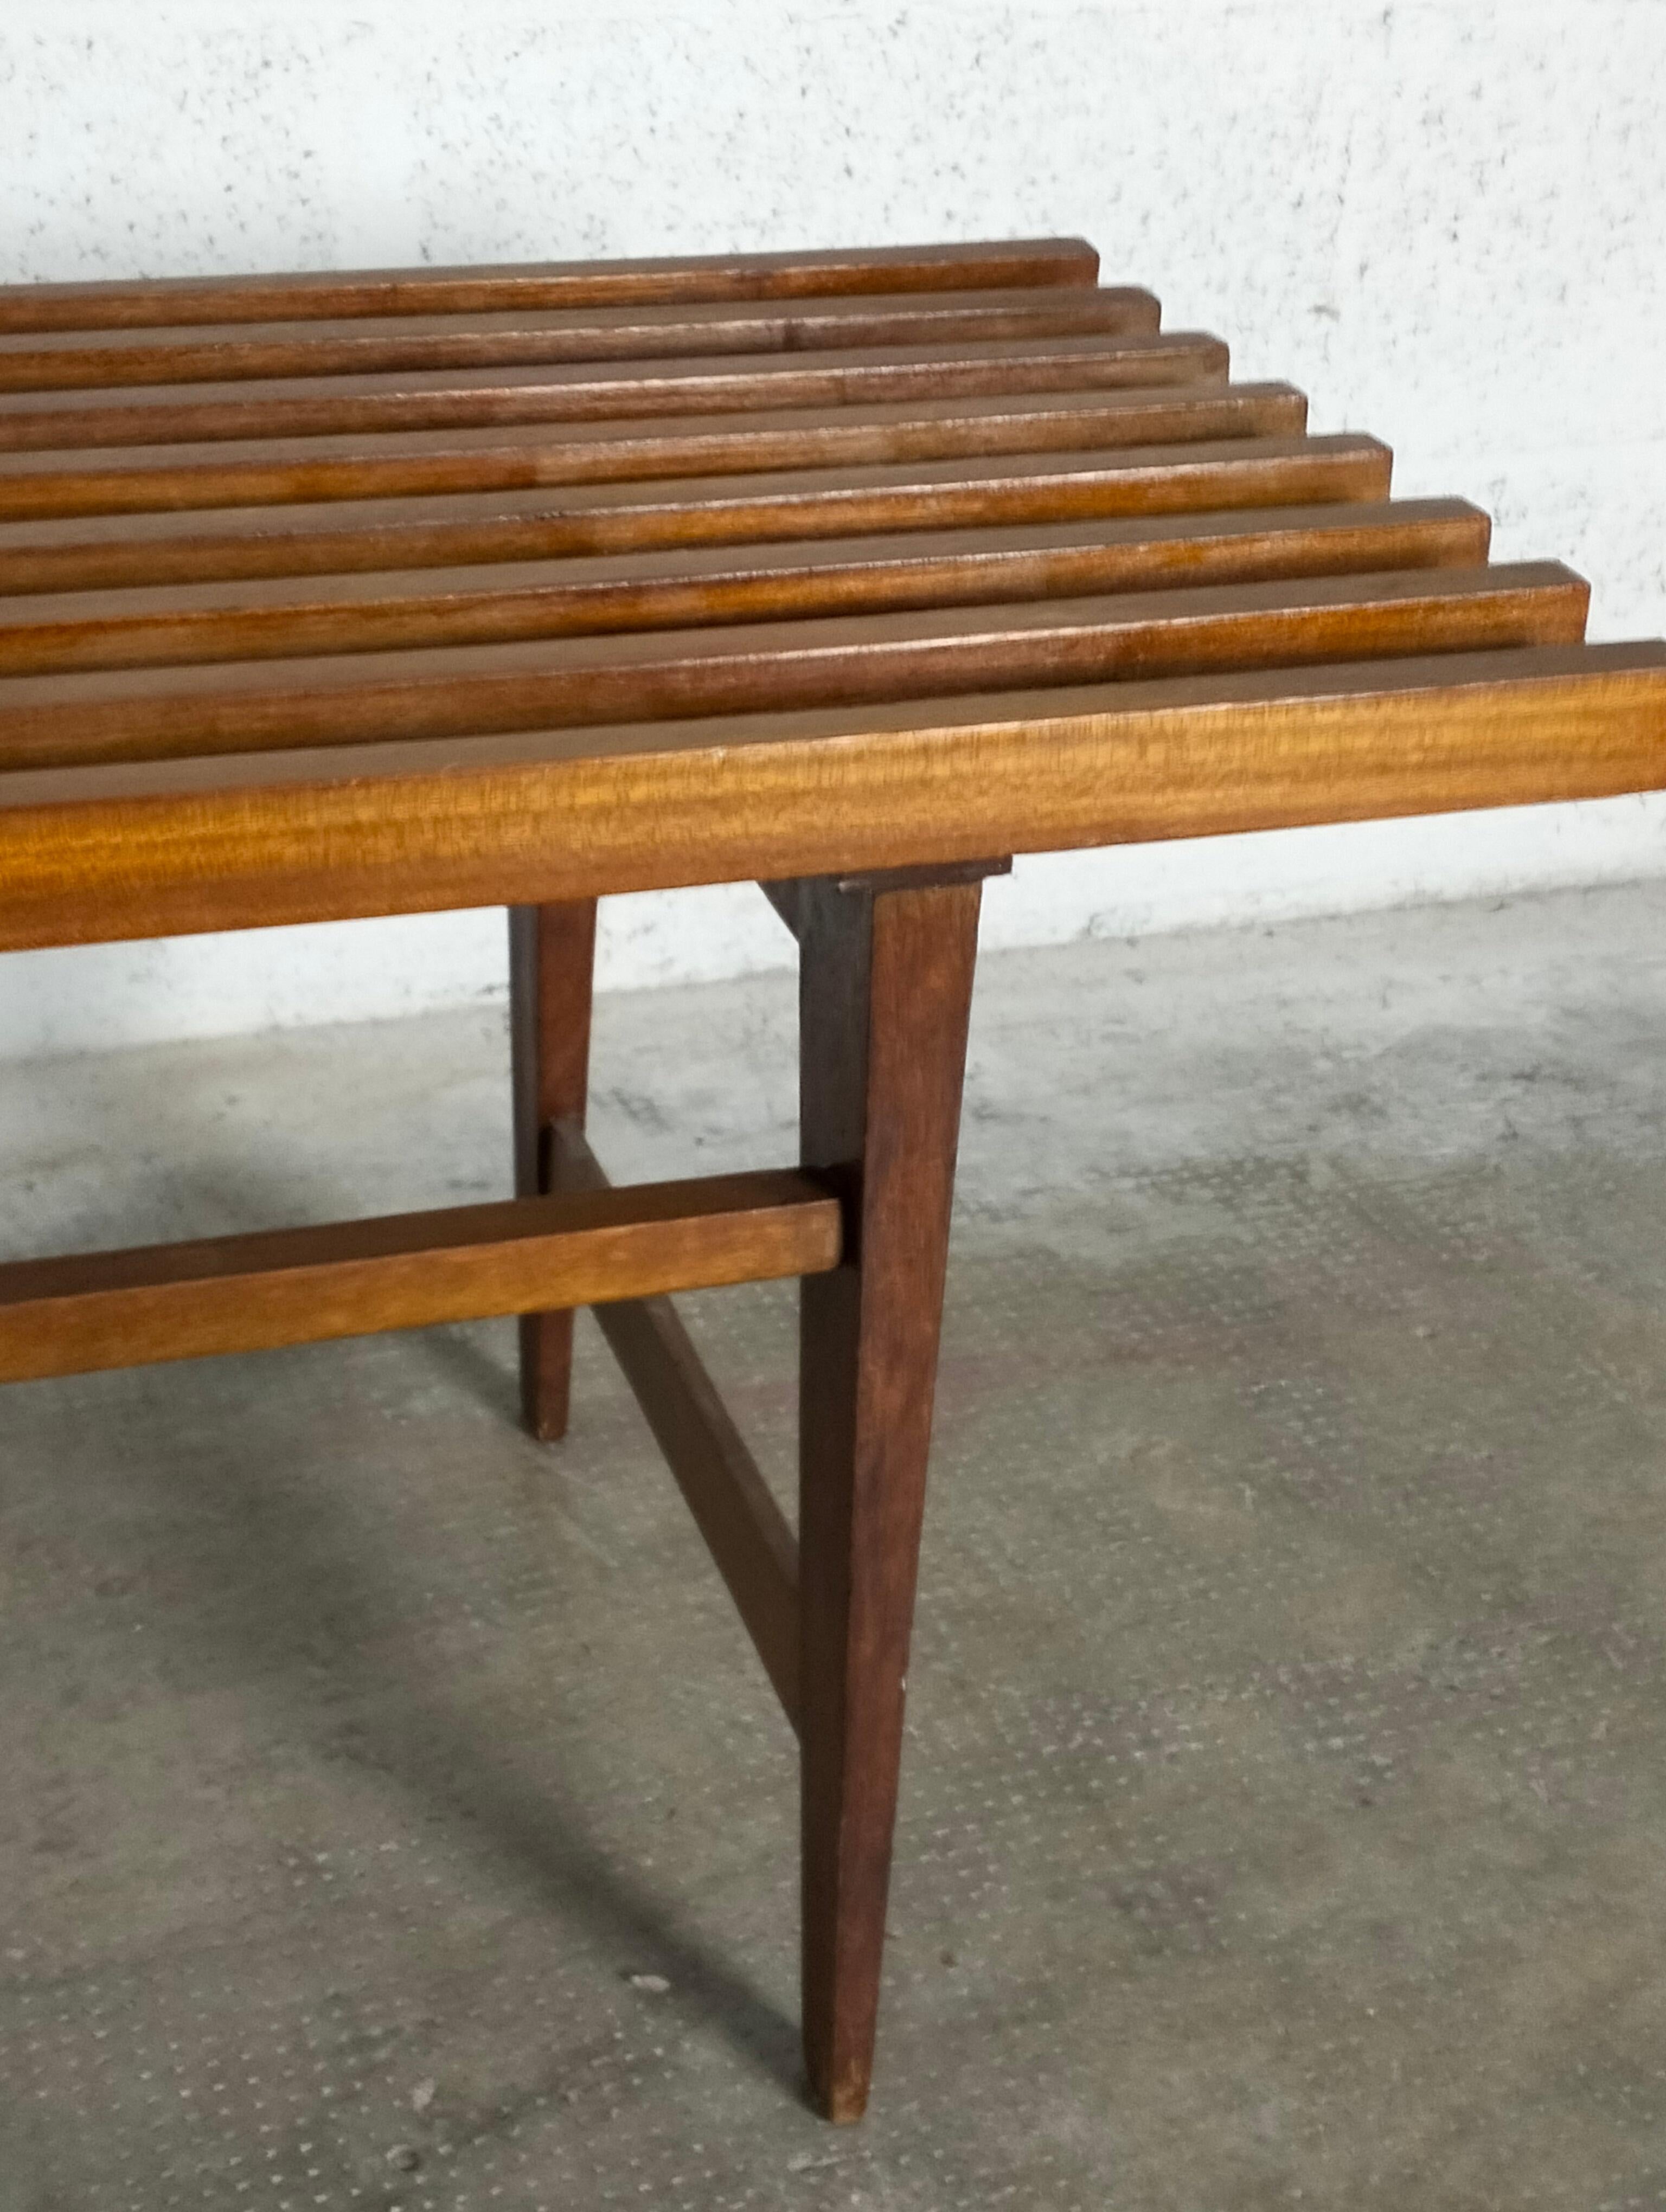 Nordic Scandinavian Style Teak Bench from the 1960s For Sale 1